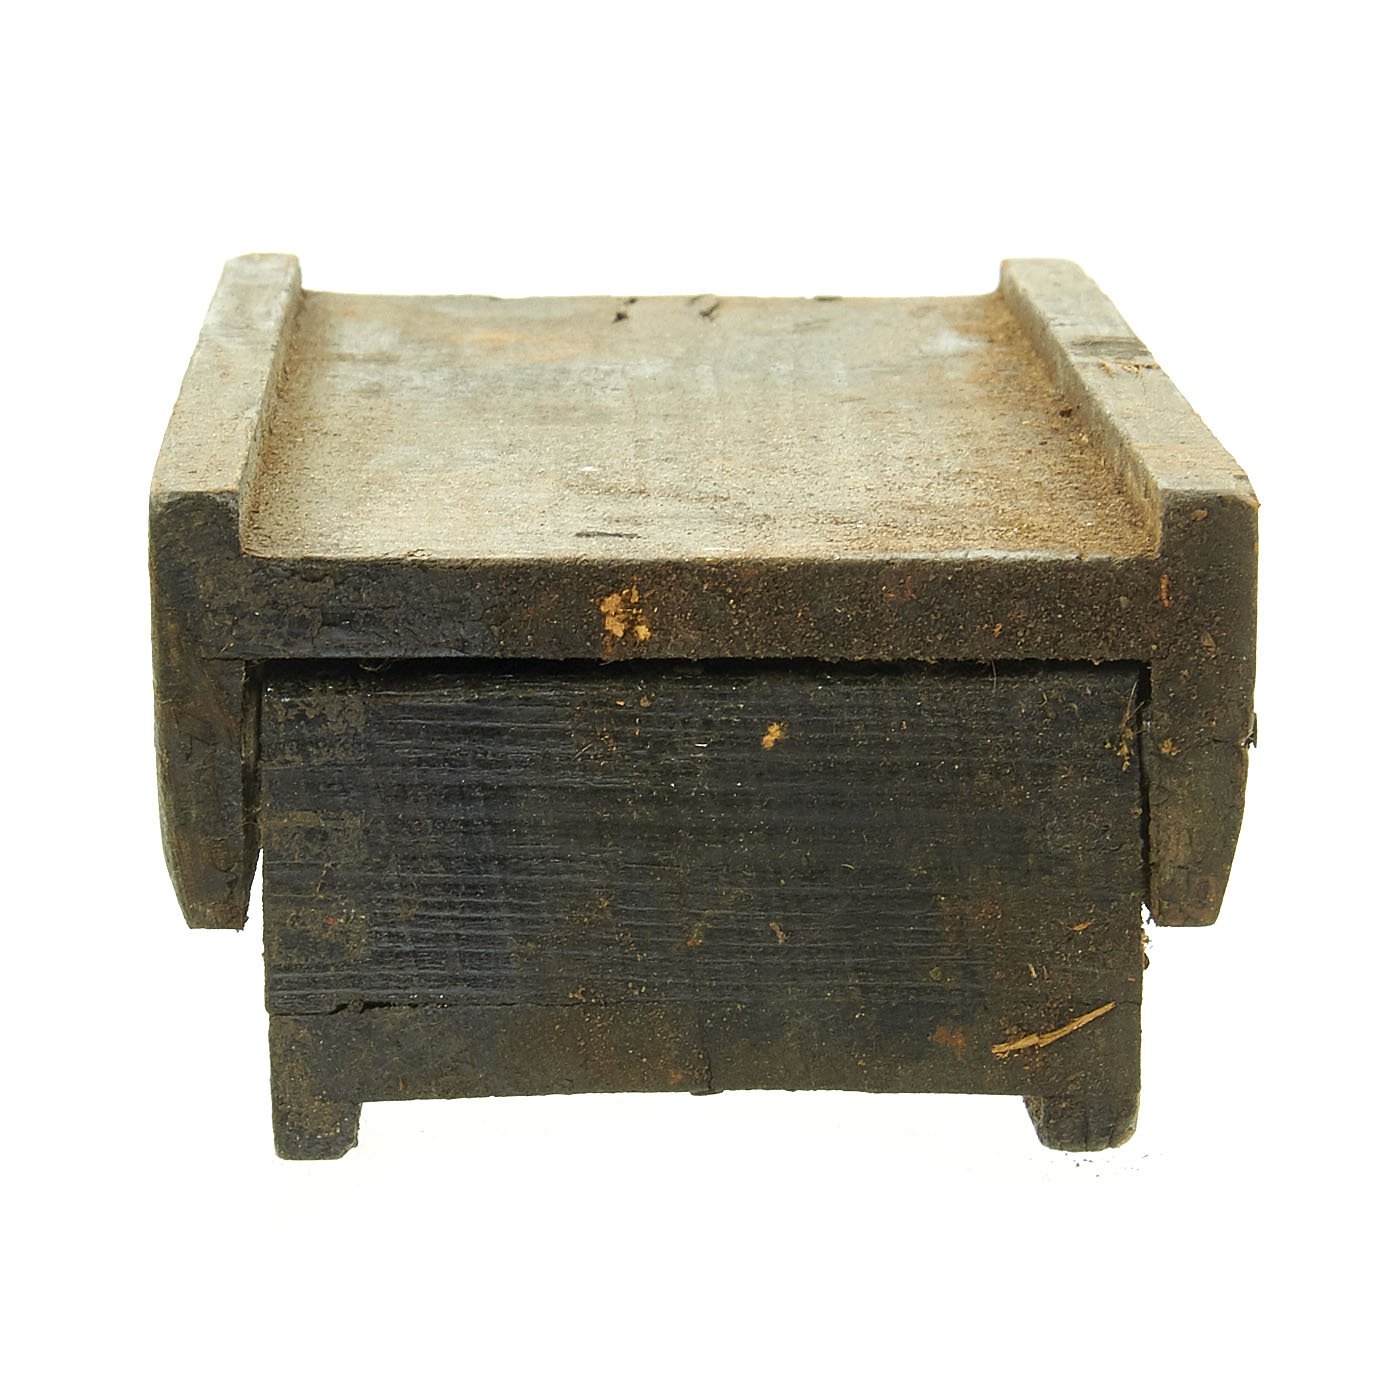 Original Russian WWII PMD-6M Wooden Box Mine with Fuze and Replica